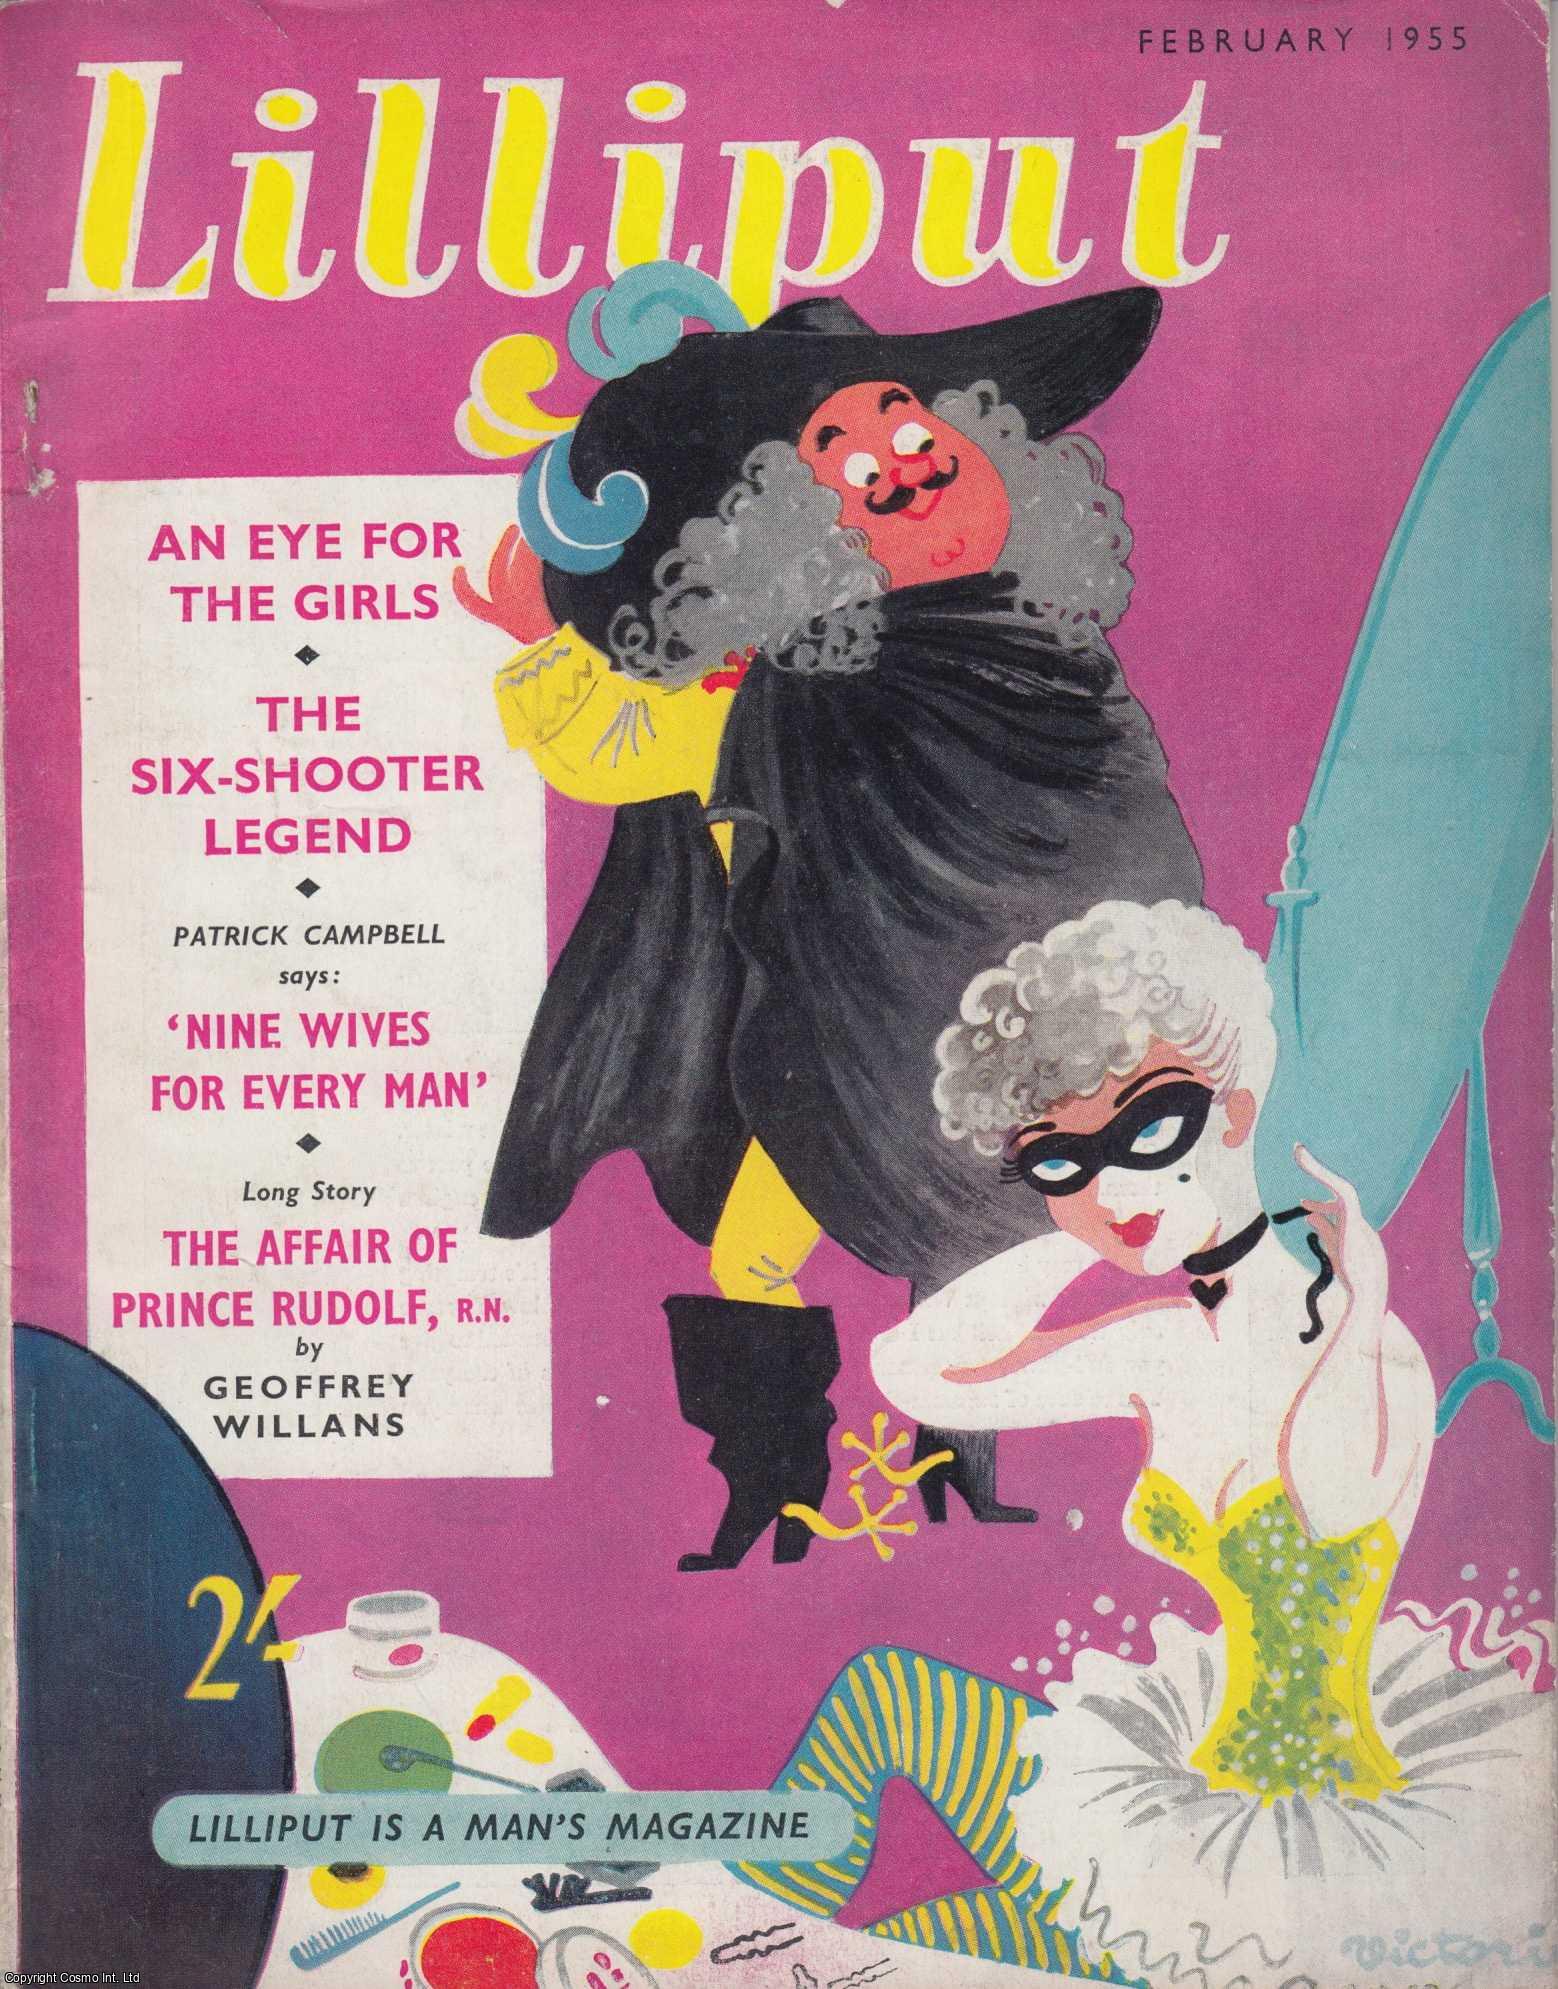 Lilliput - Lilliput Magazine. Feb 1955. Vol.36 no.2 Issue no.212. Hoffnung drawings, Geoffrey Willans story, and other pieces.